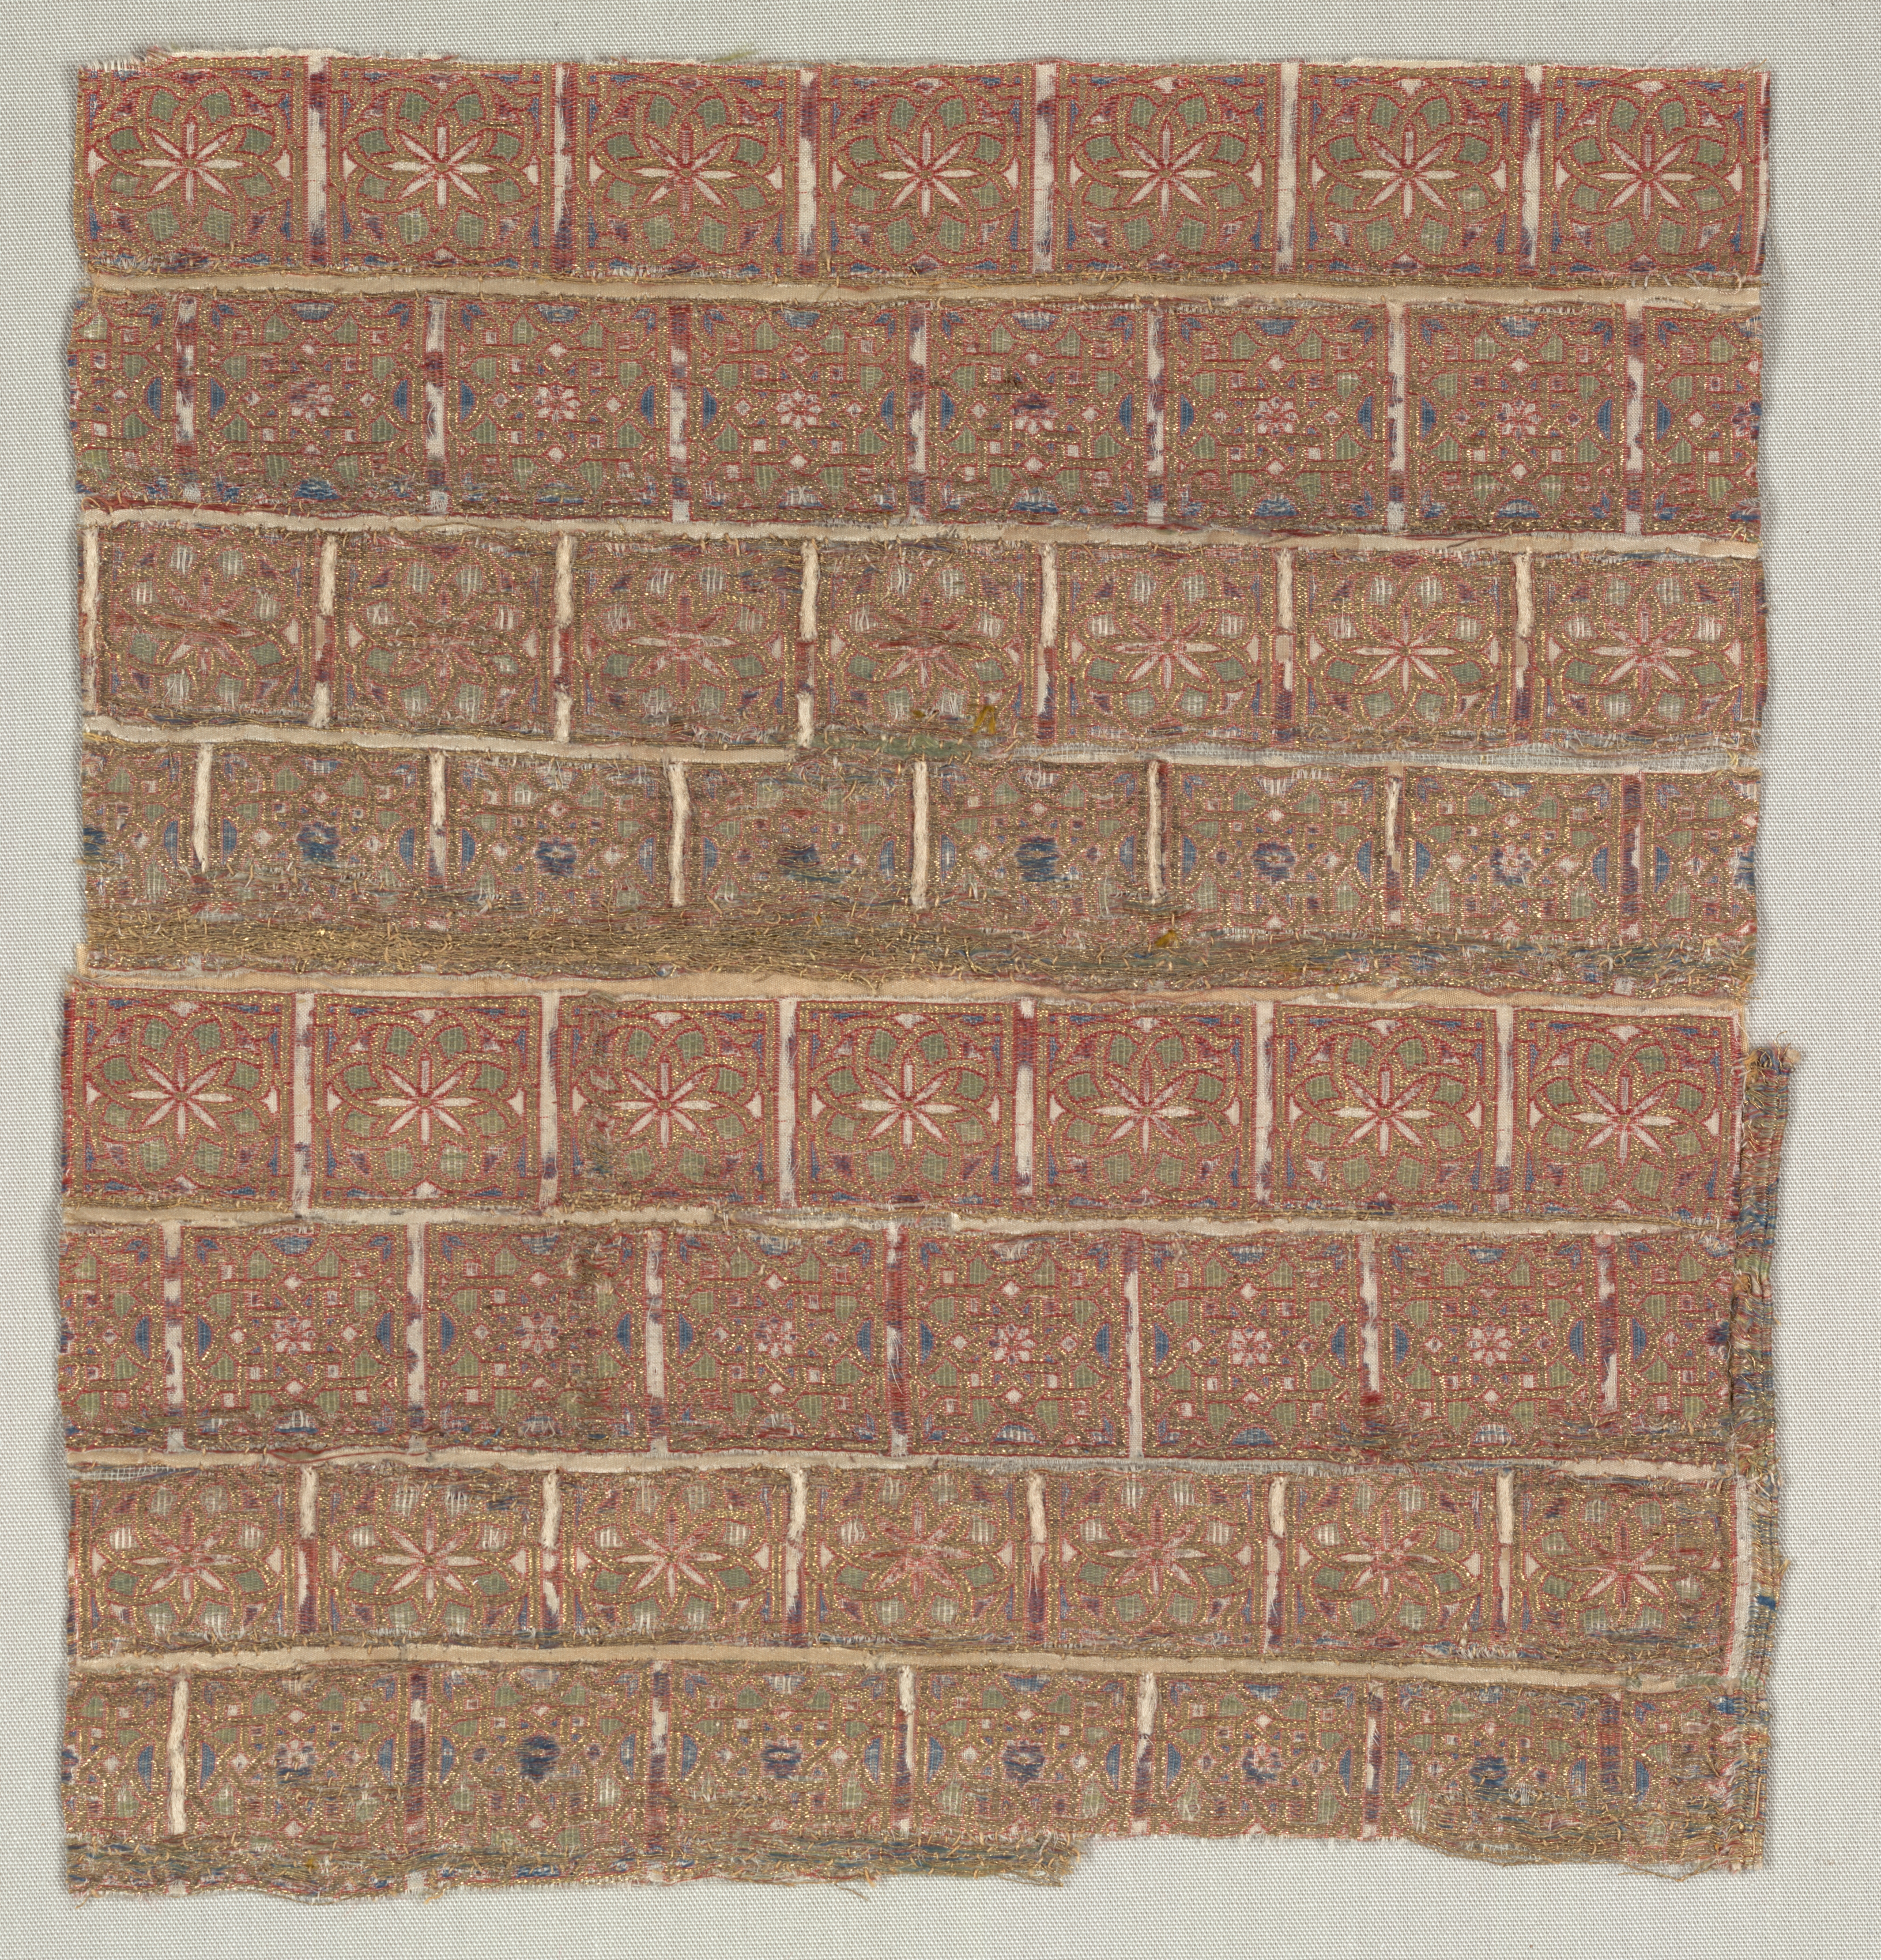 Vestment fragment with stars in staggered squares